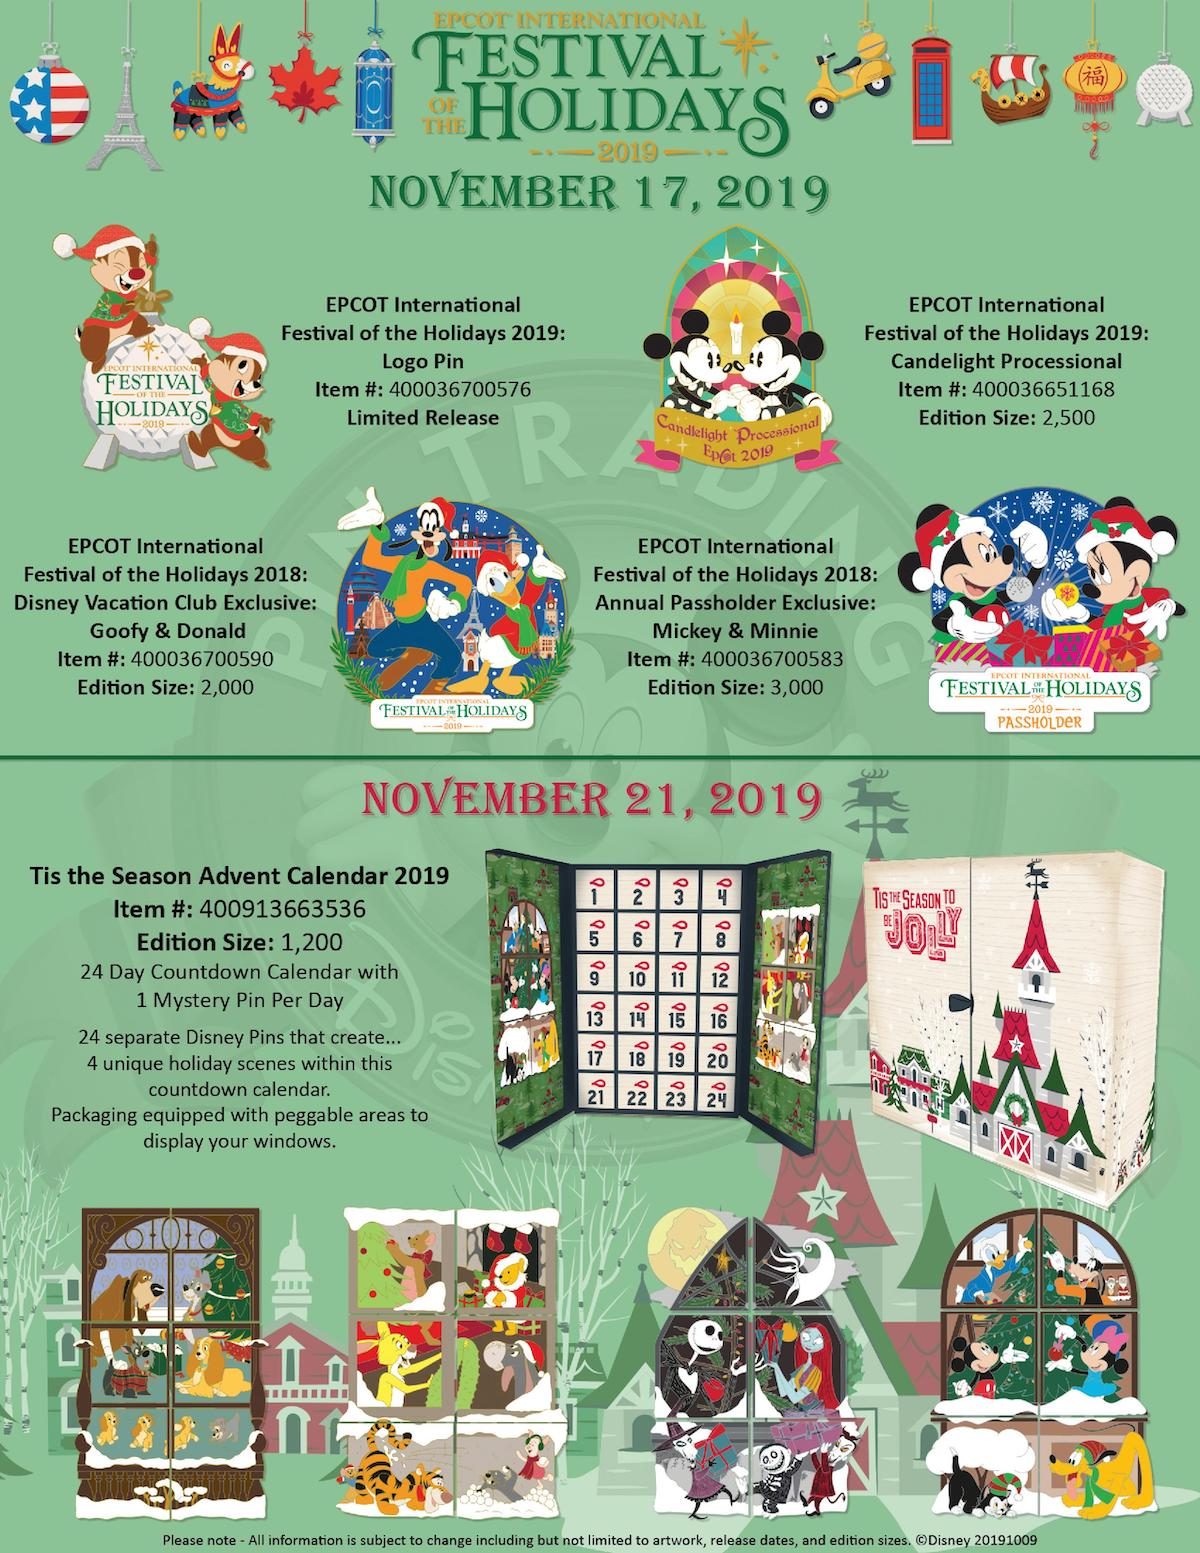 Epcot Festival of the Holidays 2019 Disney Pins